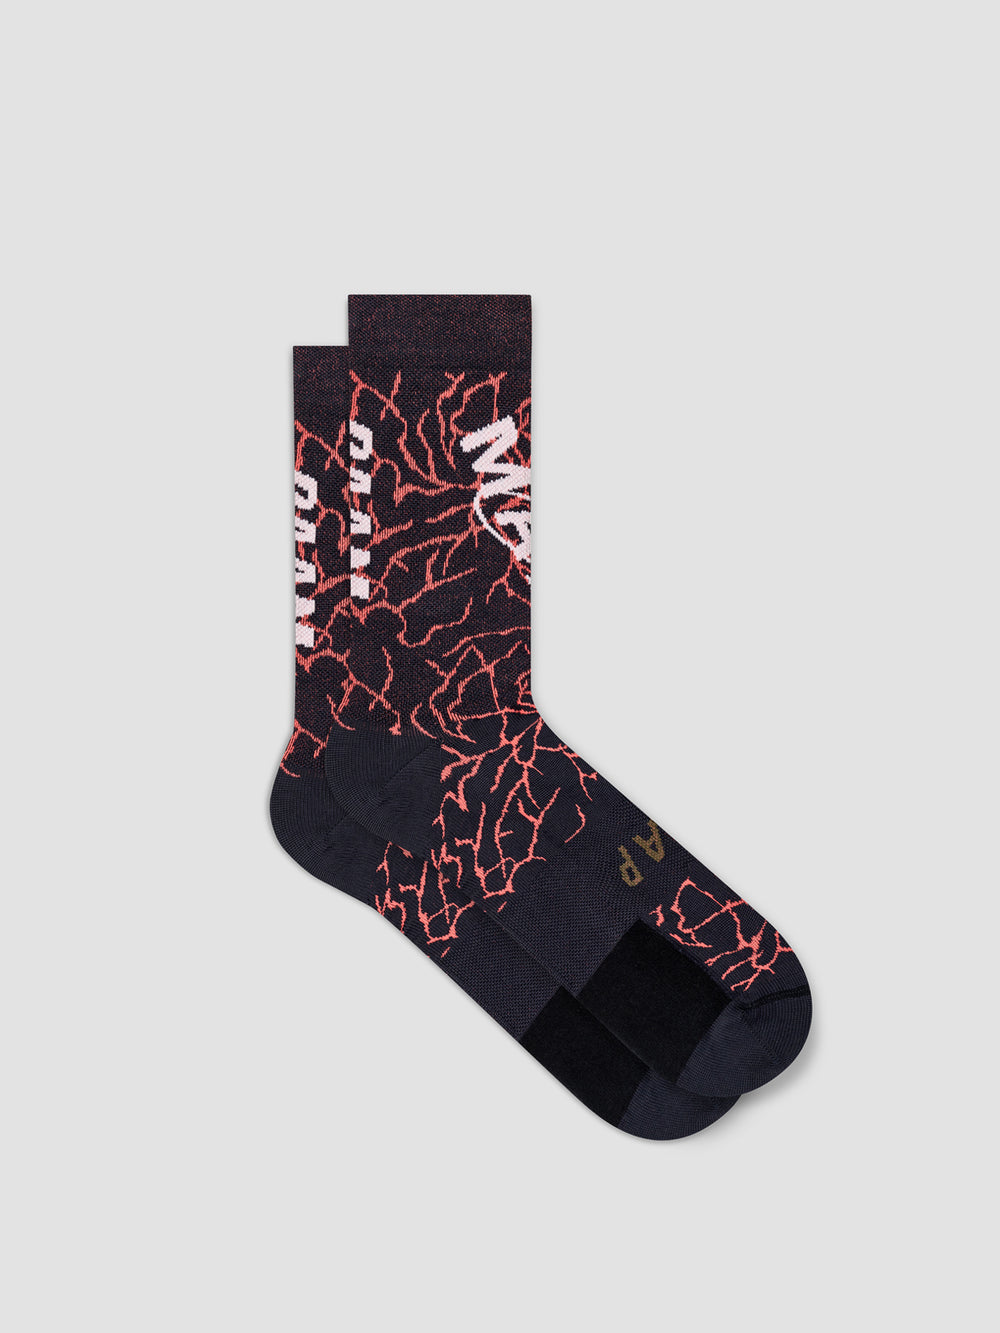 Product Image for MAAP X PAM Socks